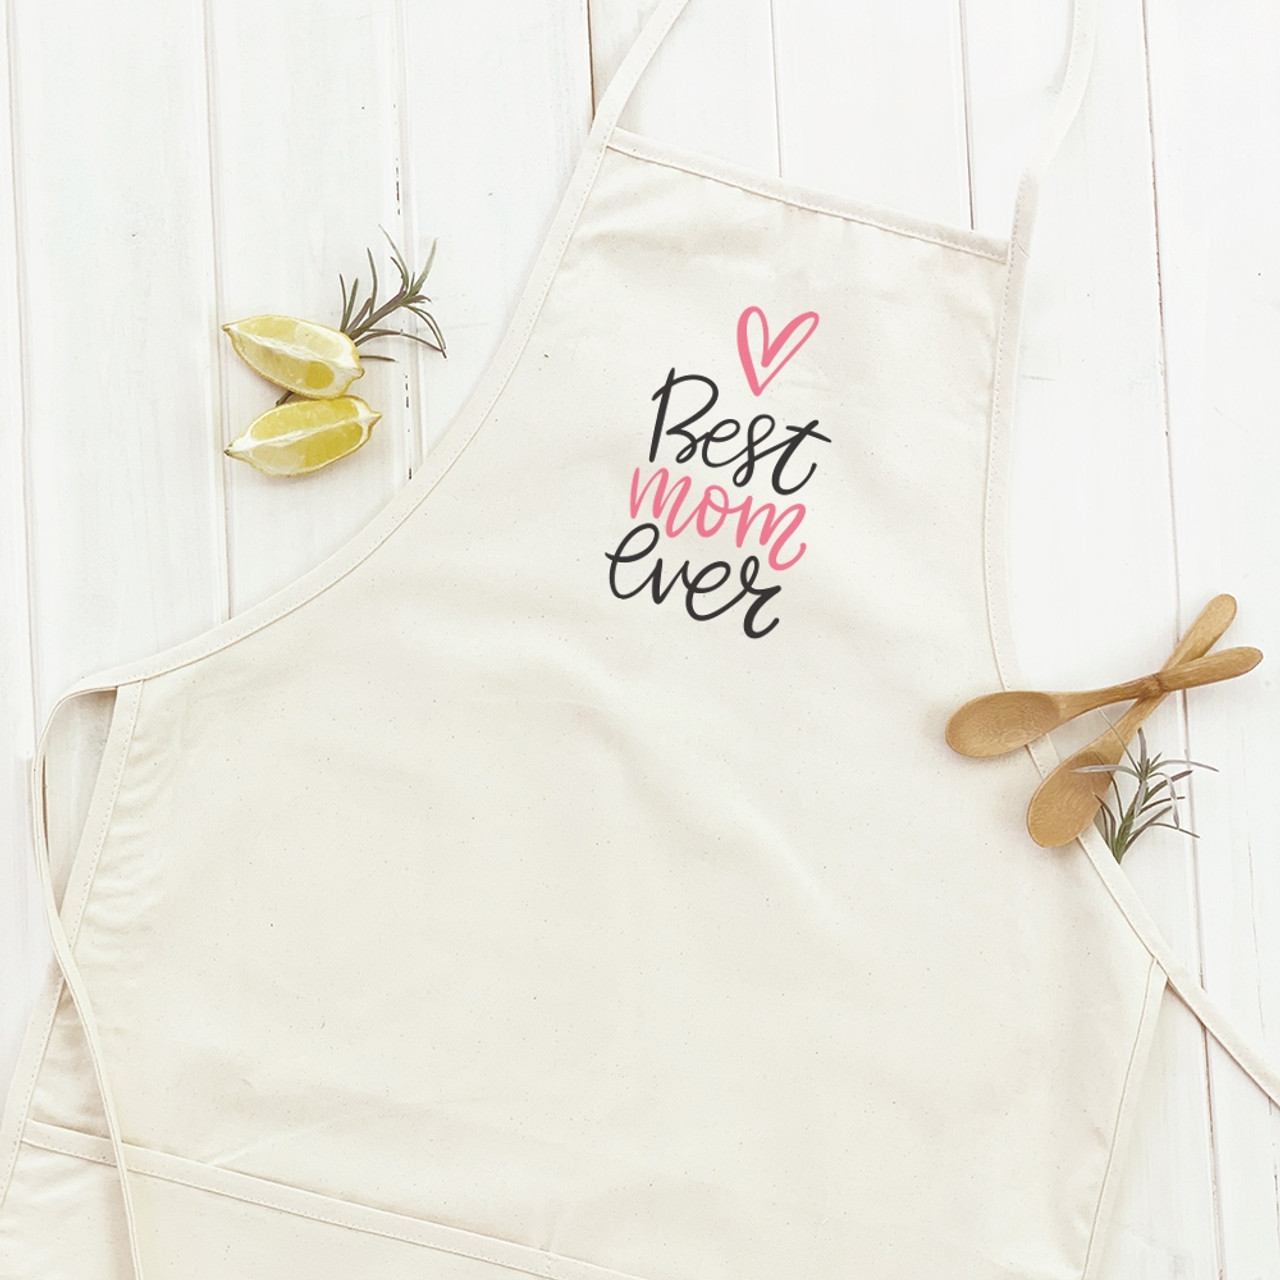 Best Mom Ever Apron